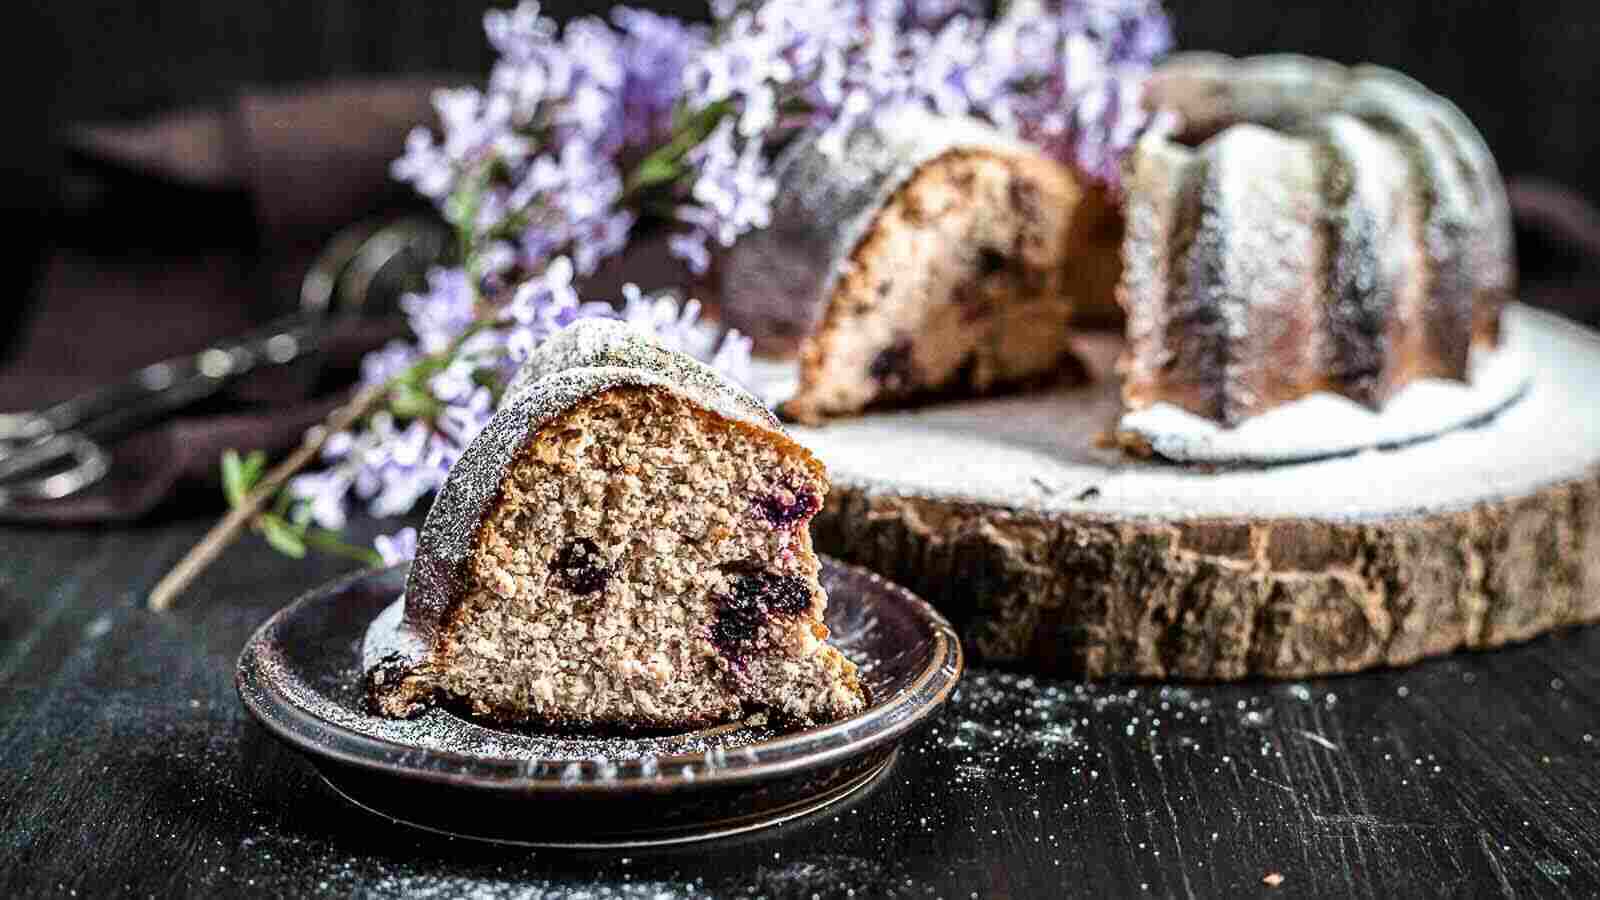 A bundt cake with blueberries on top of a wooden board.